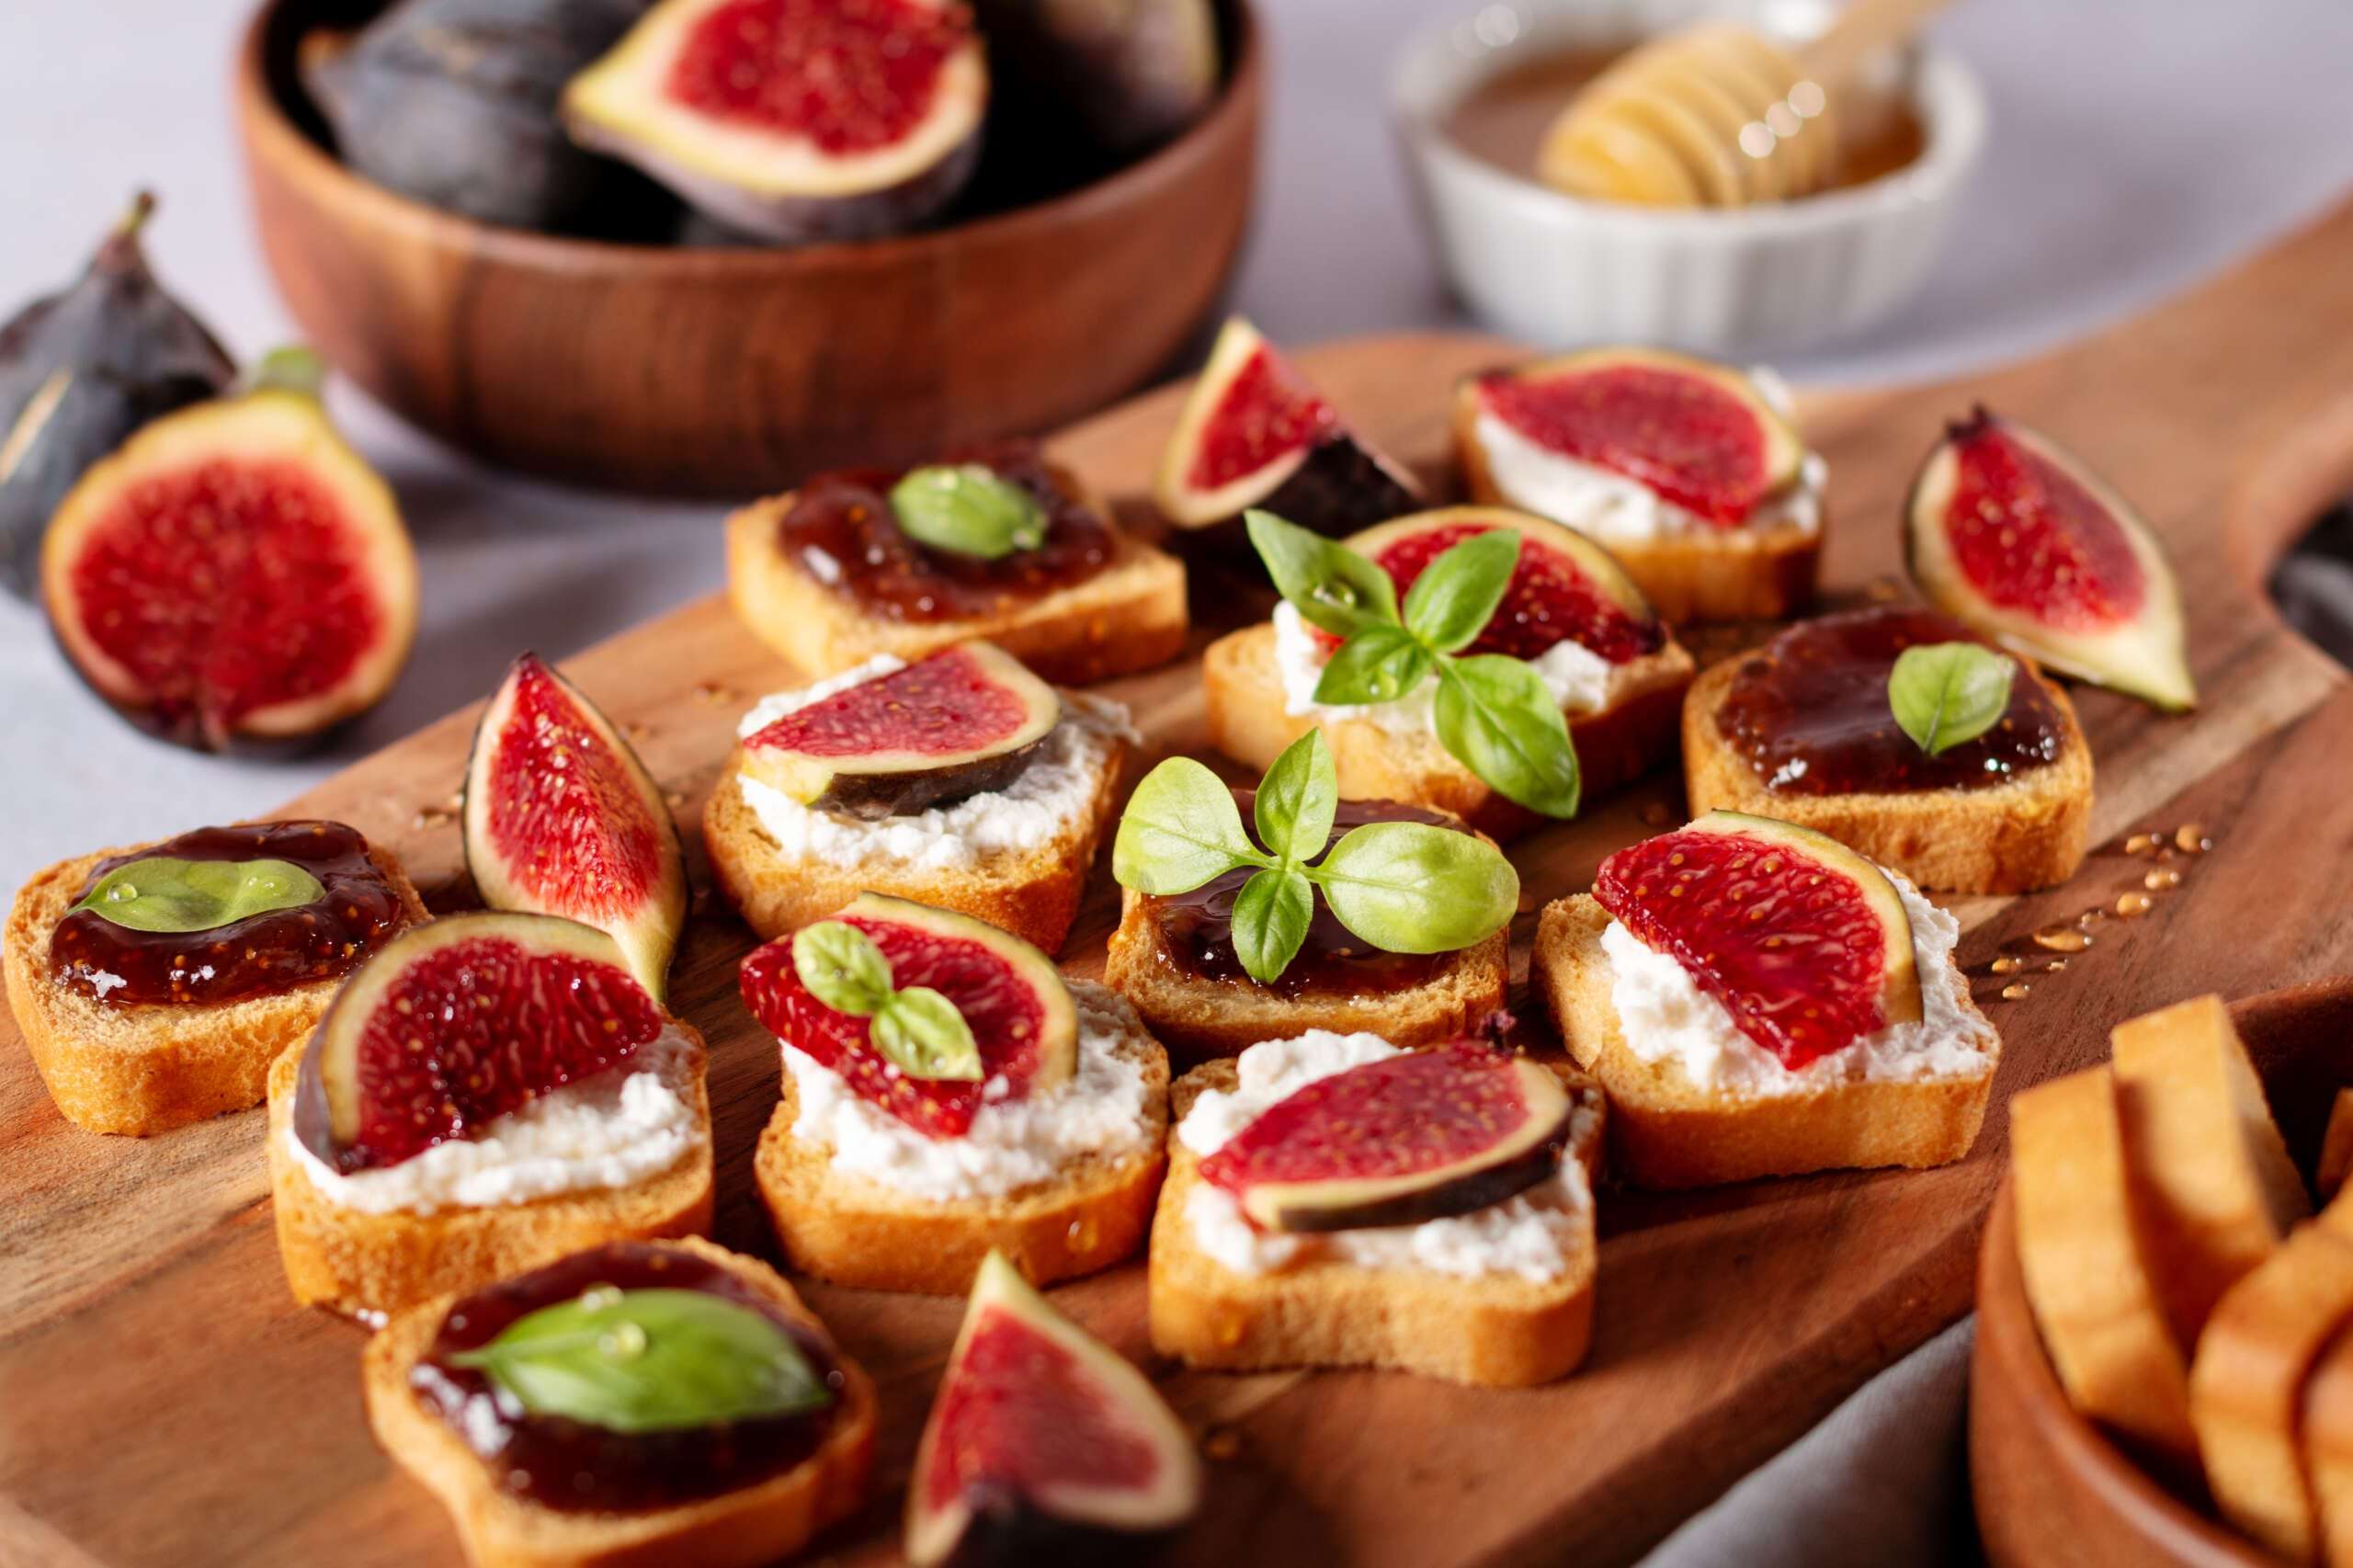 Canape Board Display featuring Toasts with Figs, Ricotta, and Fig Marmalade